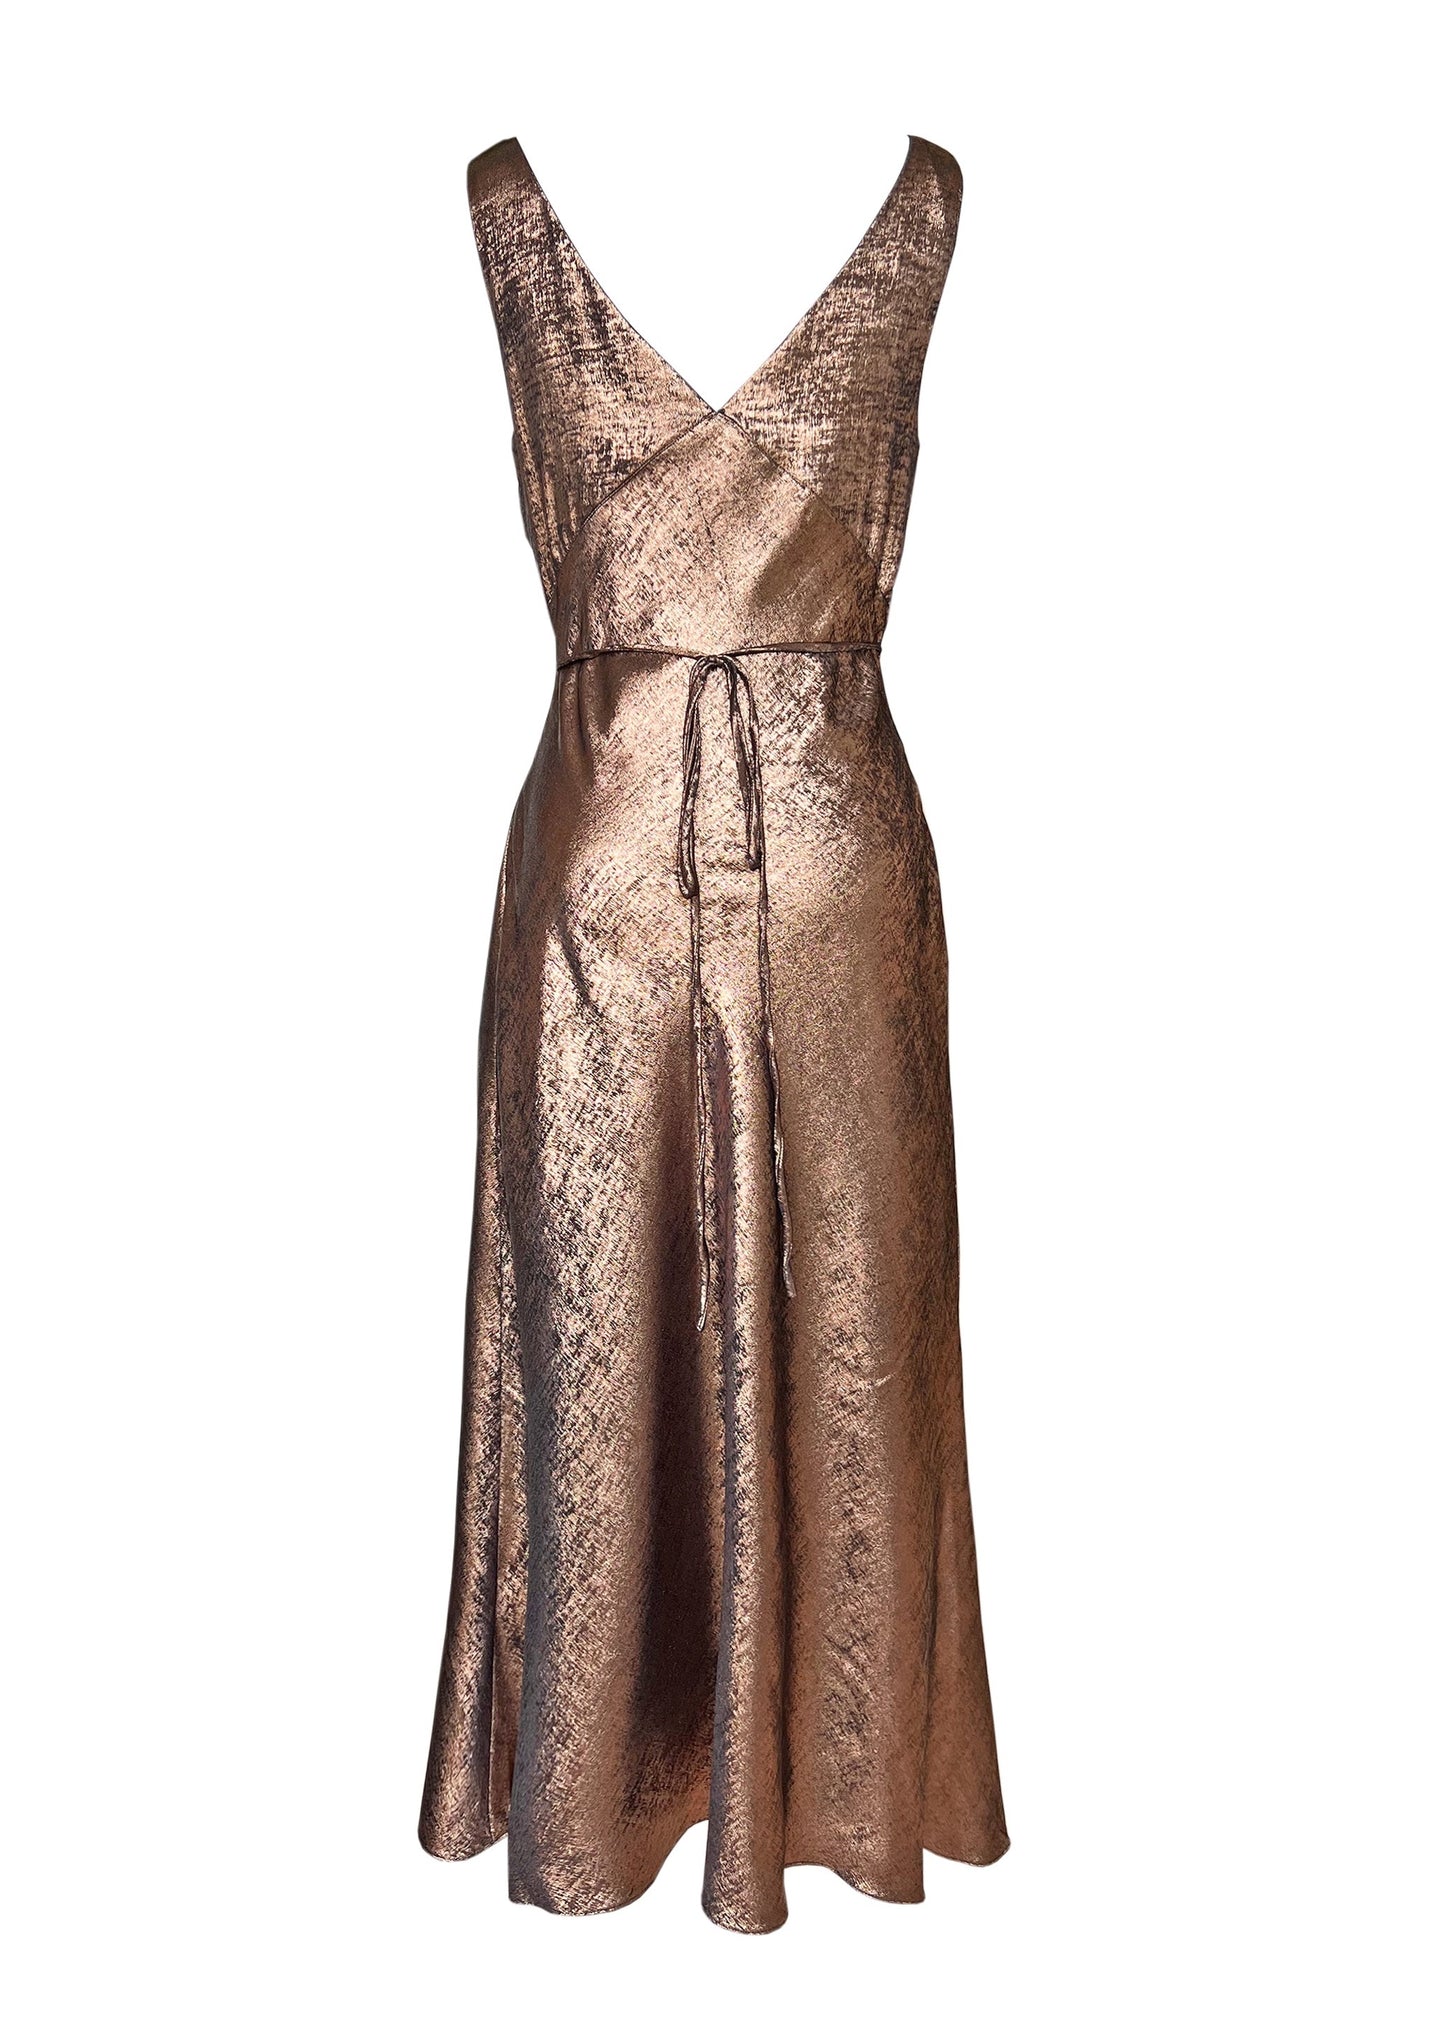 CLEO DRESS in the Great Gatsby